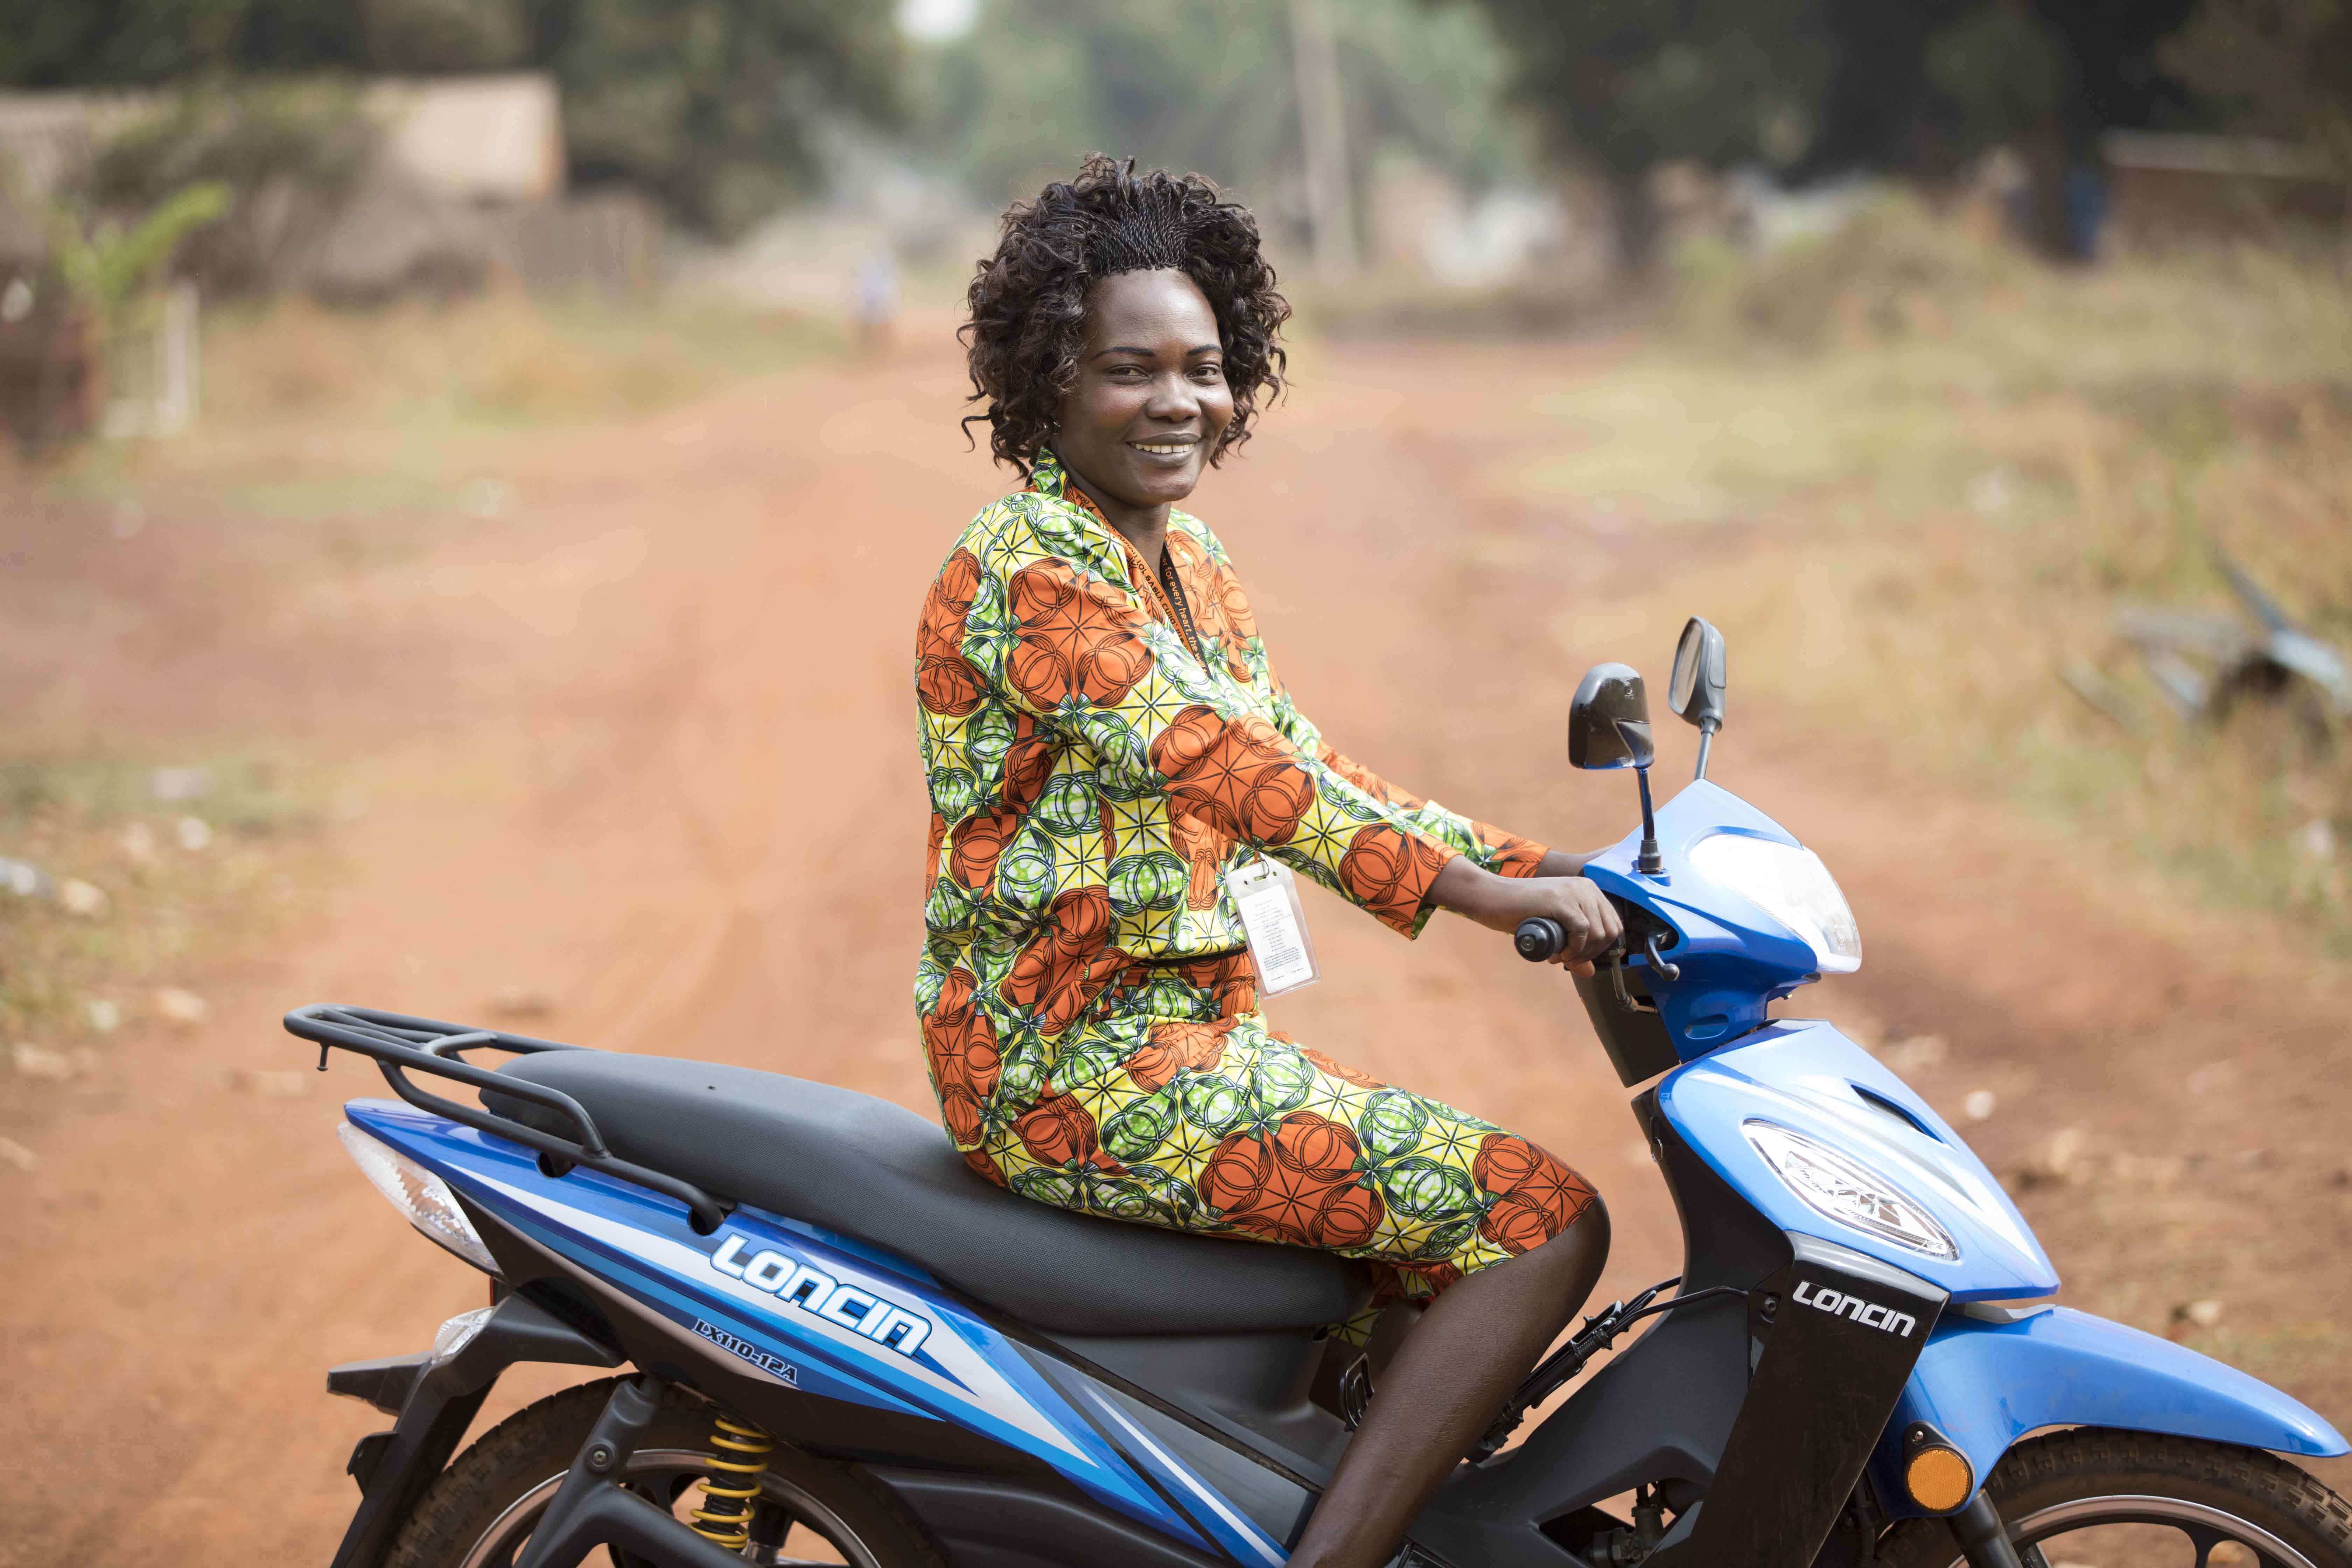 World Vision aid worker in South Sudan sits atop a motorbike on a dirt road